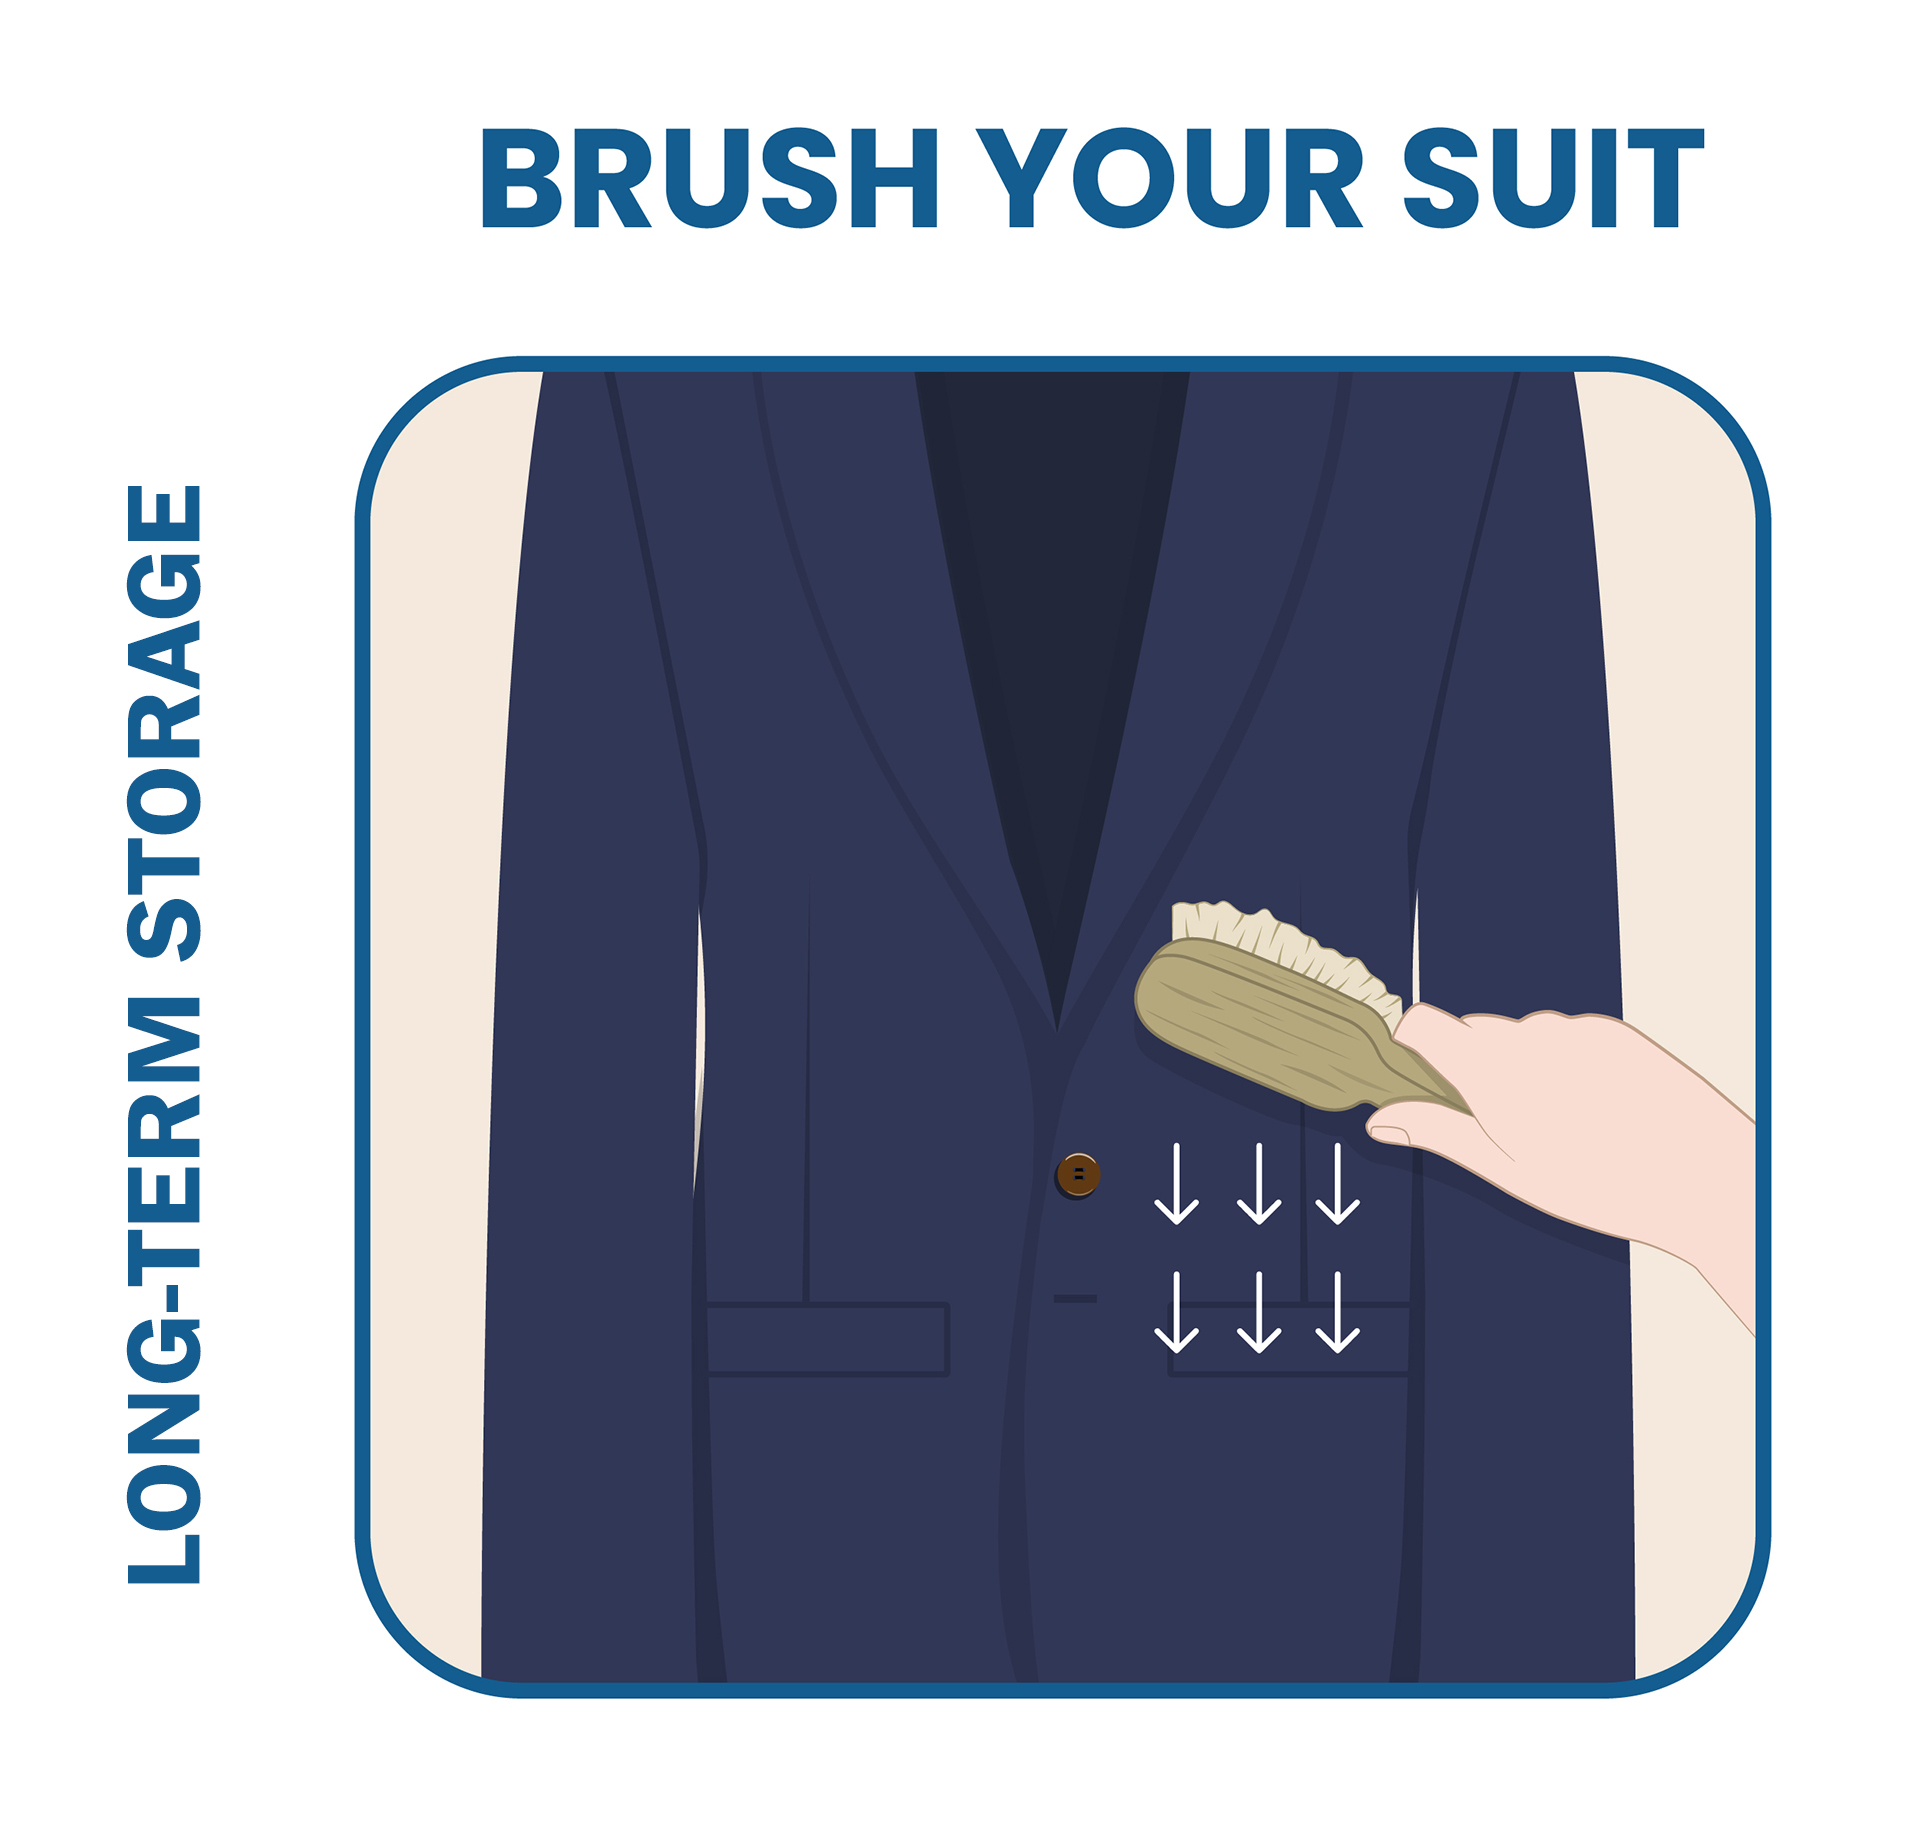 Brush and clean the suit before long-term storage